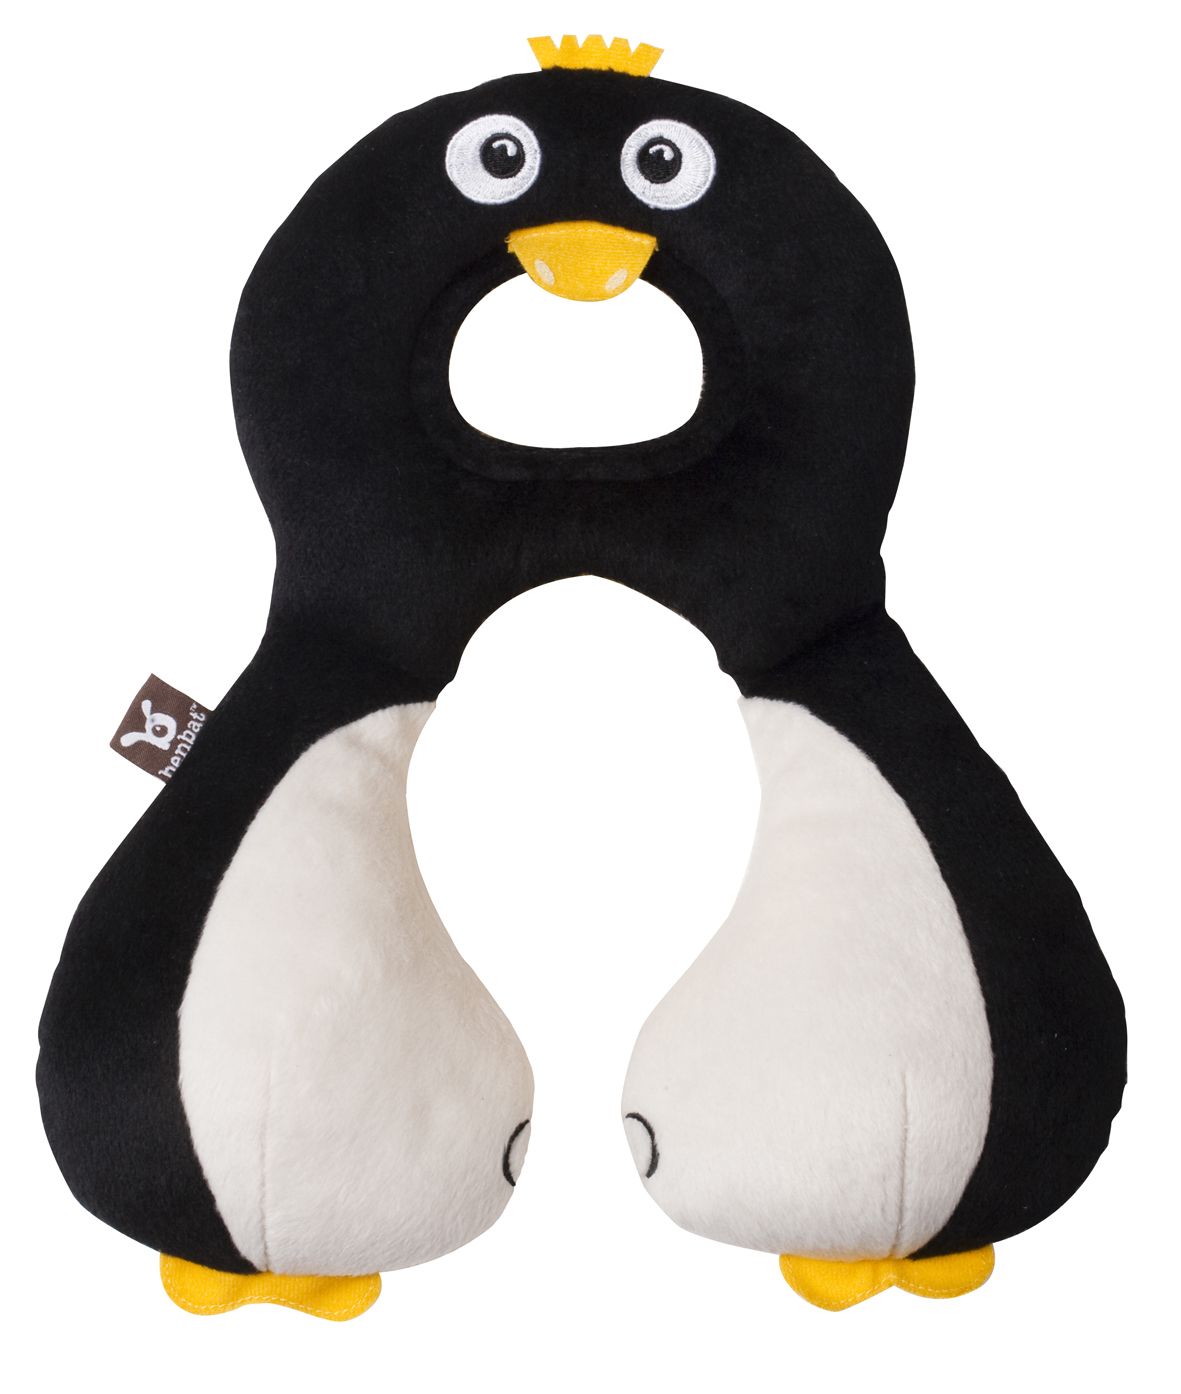 Travel Friends Head and Neck Support - Penguin (1-4 years old)